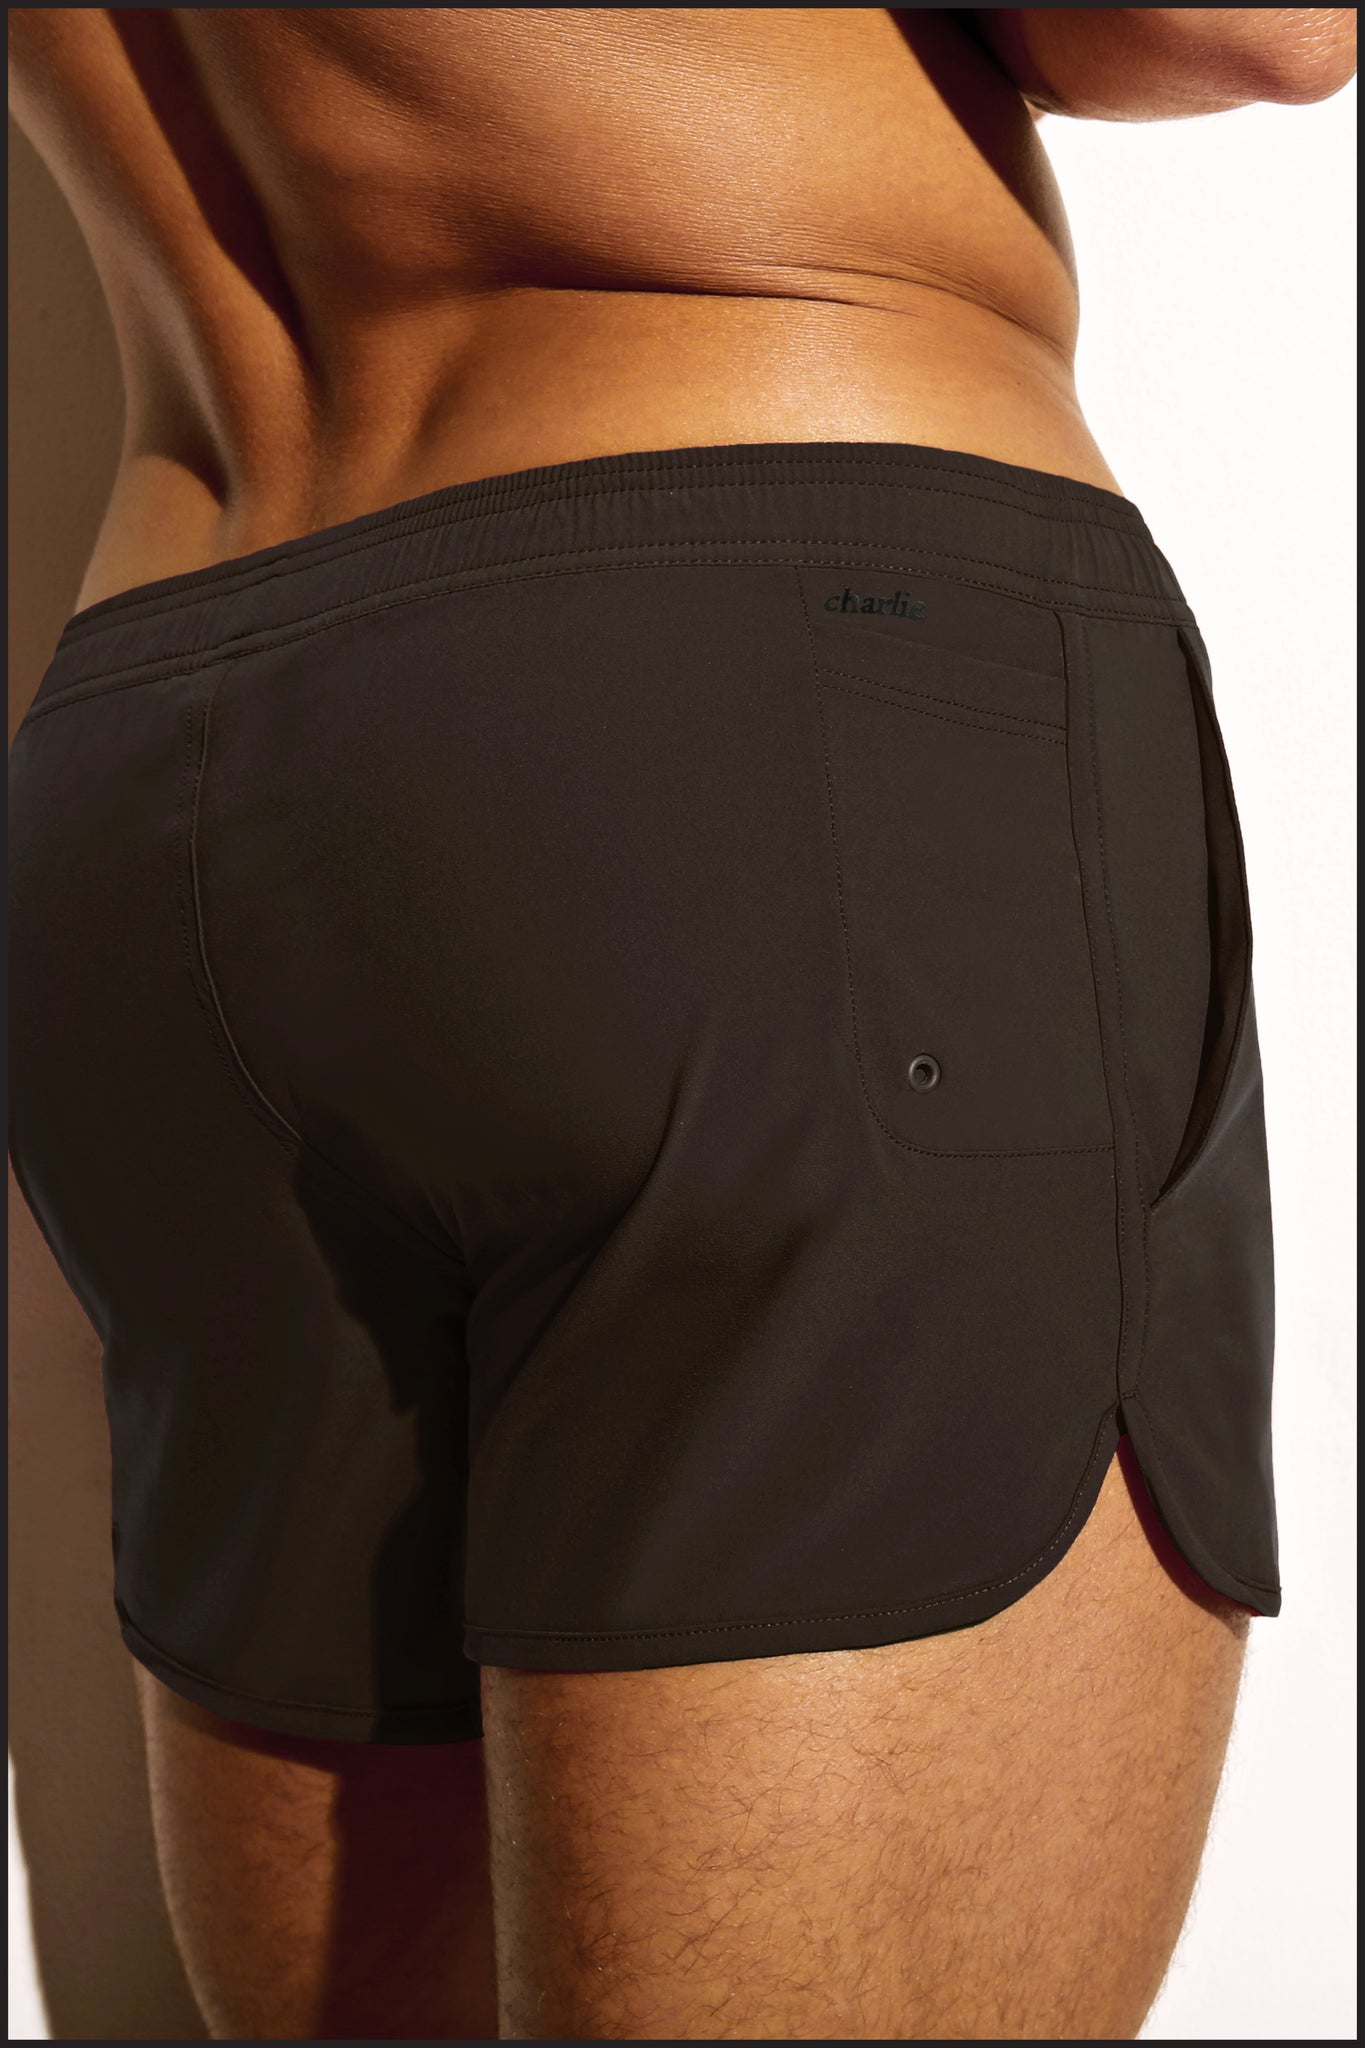 Charlie by Matthew Zink Fitness Apparel Circuit Trainer Short